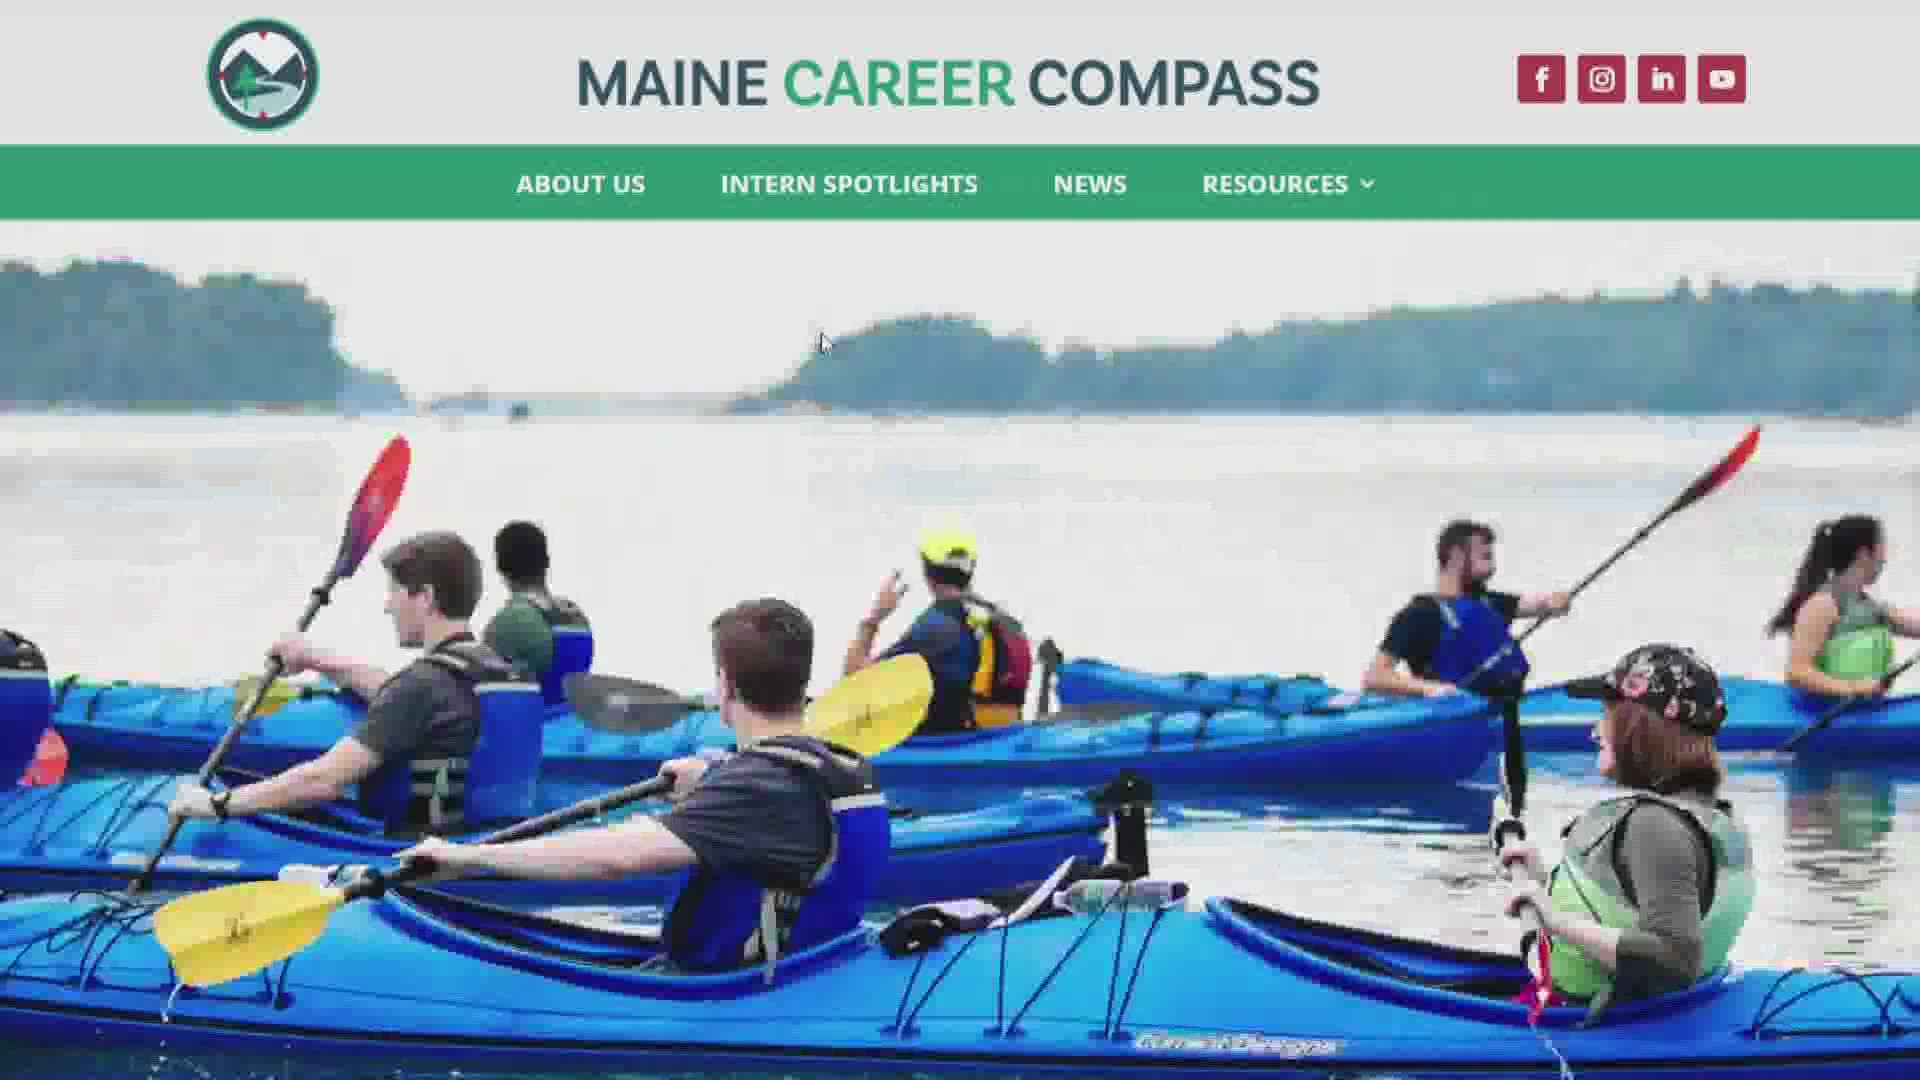 Maine Career Compass is expanding its internship programming to include students in co-ops and apprenticeships